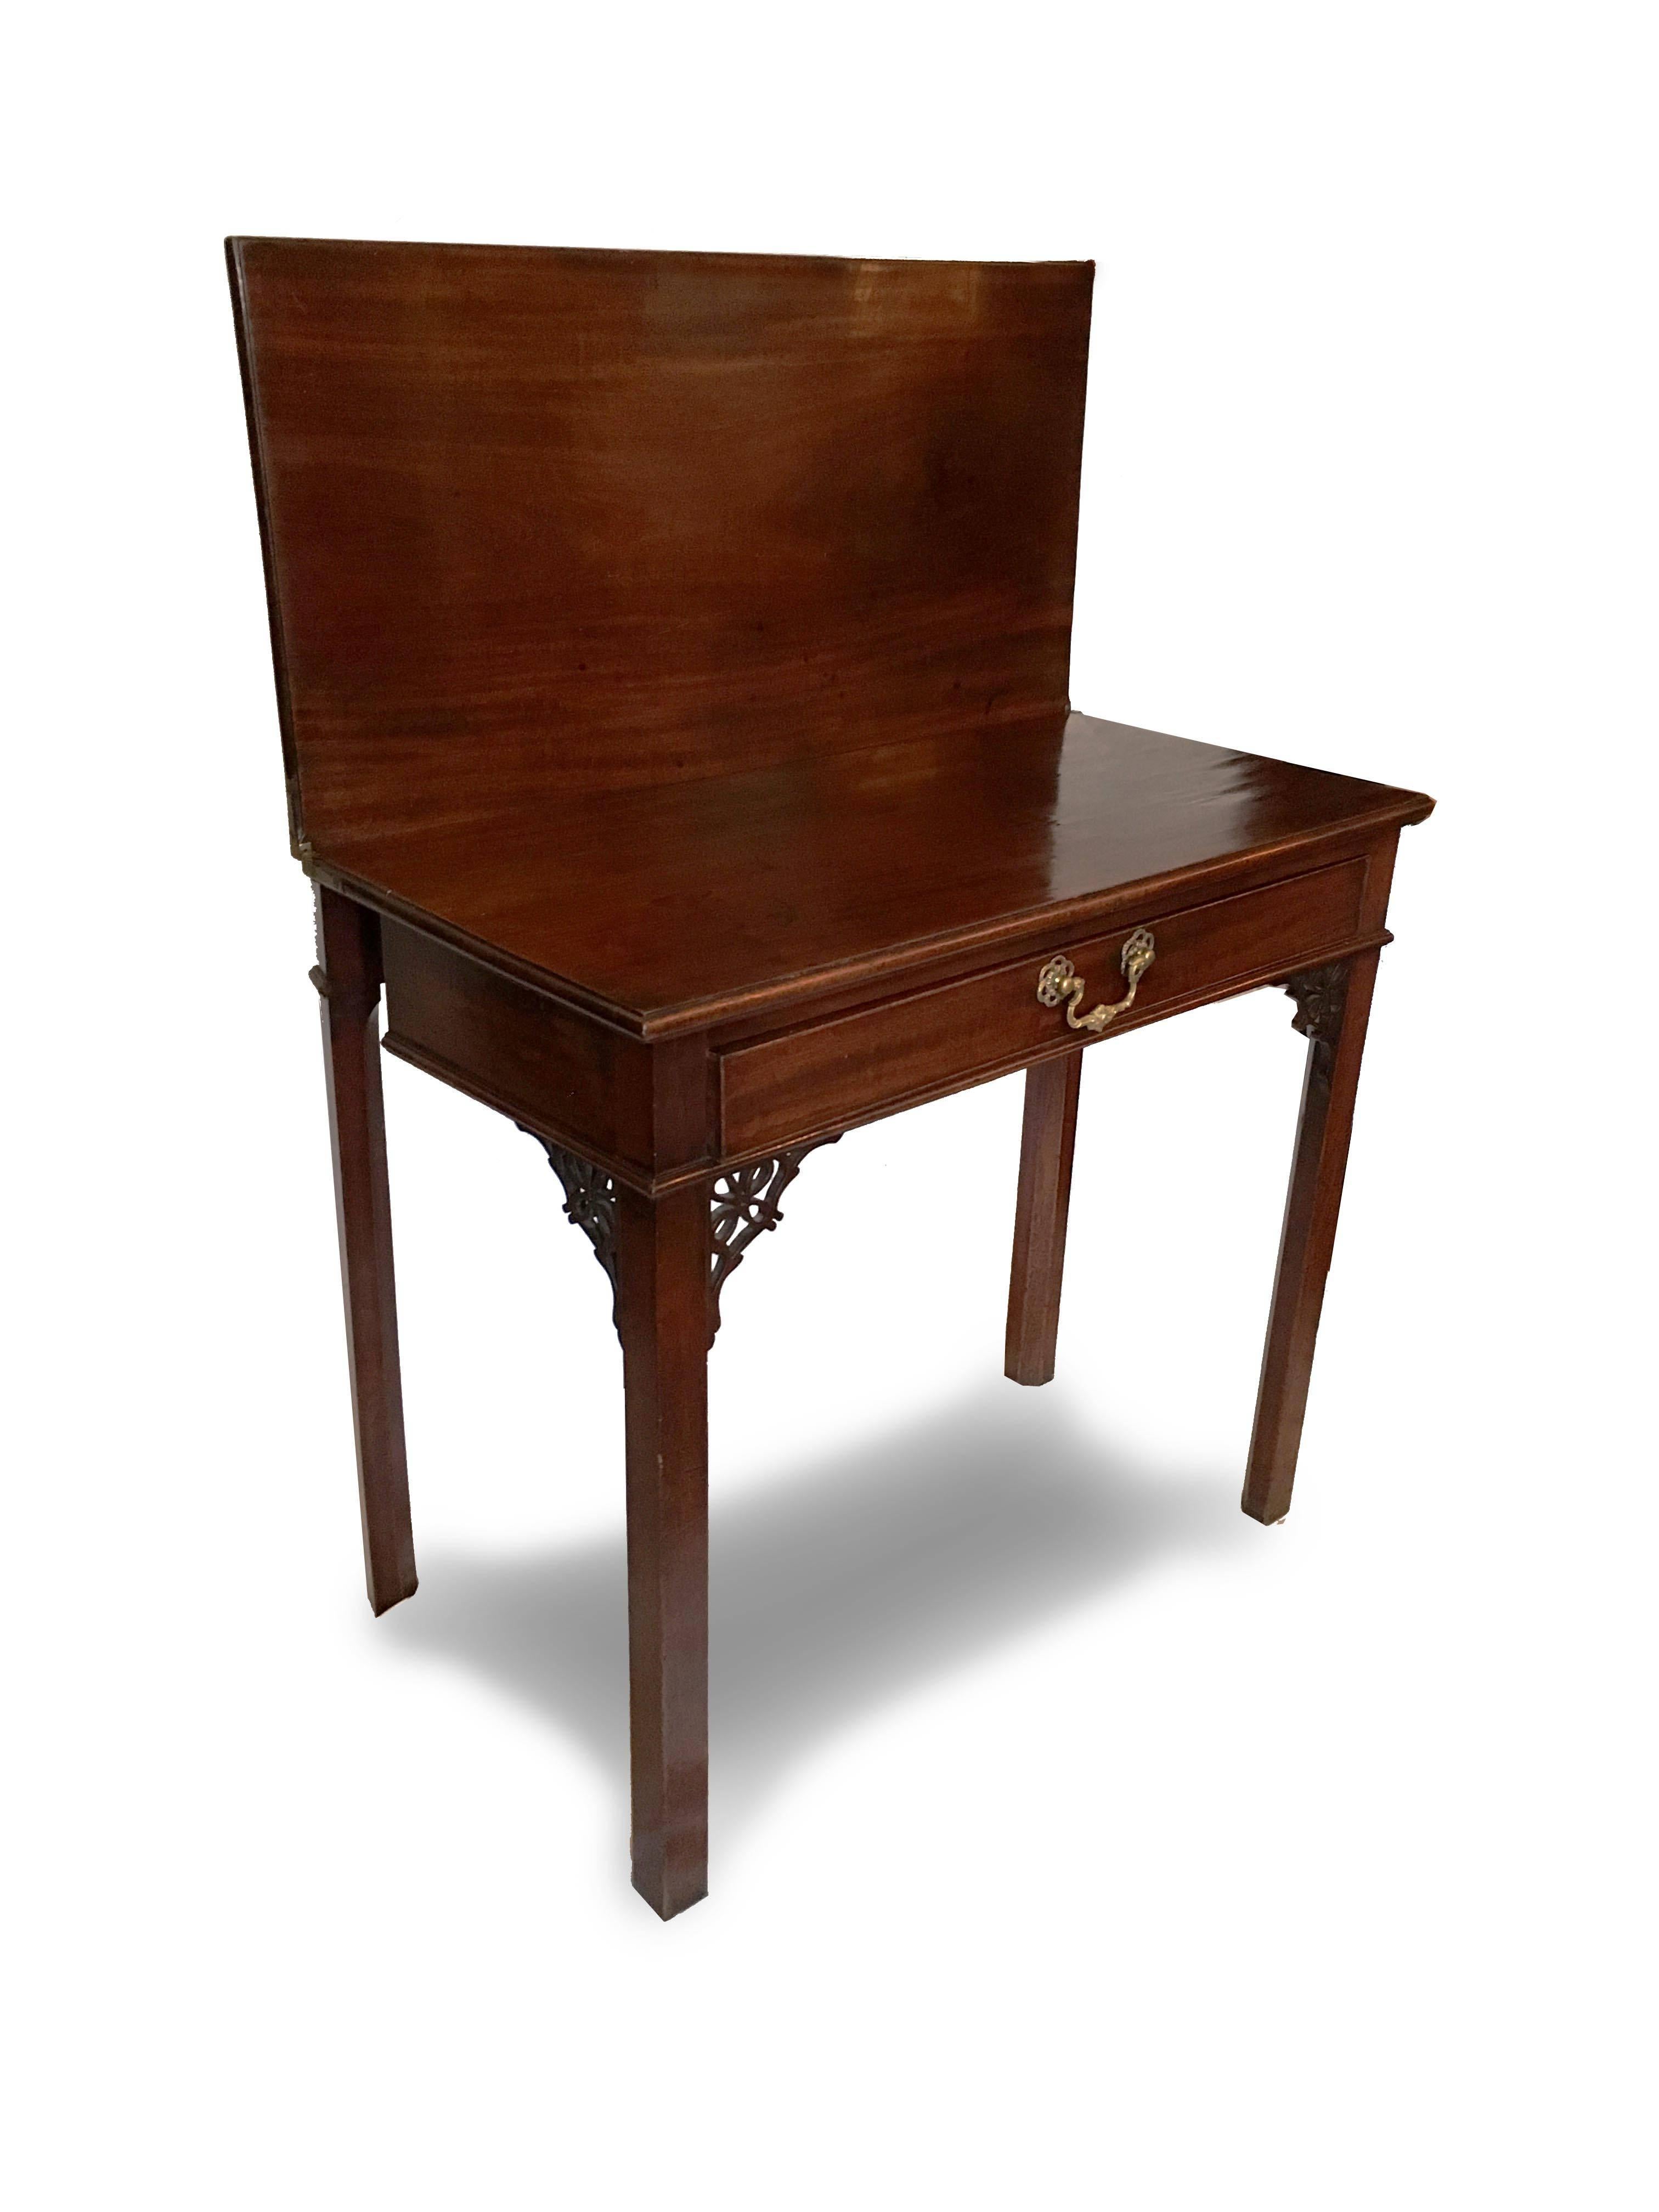 An English George III mahogany card or console table with rectangular flip topbearing a molded edge. The top is supported by a frieze drawer with period brass pull. Presumed original pierced brackets join the case to the square moulded legs. A gate